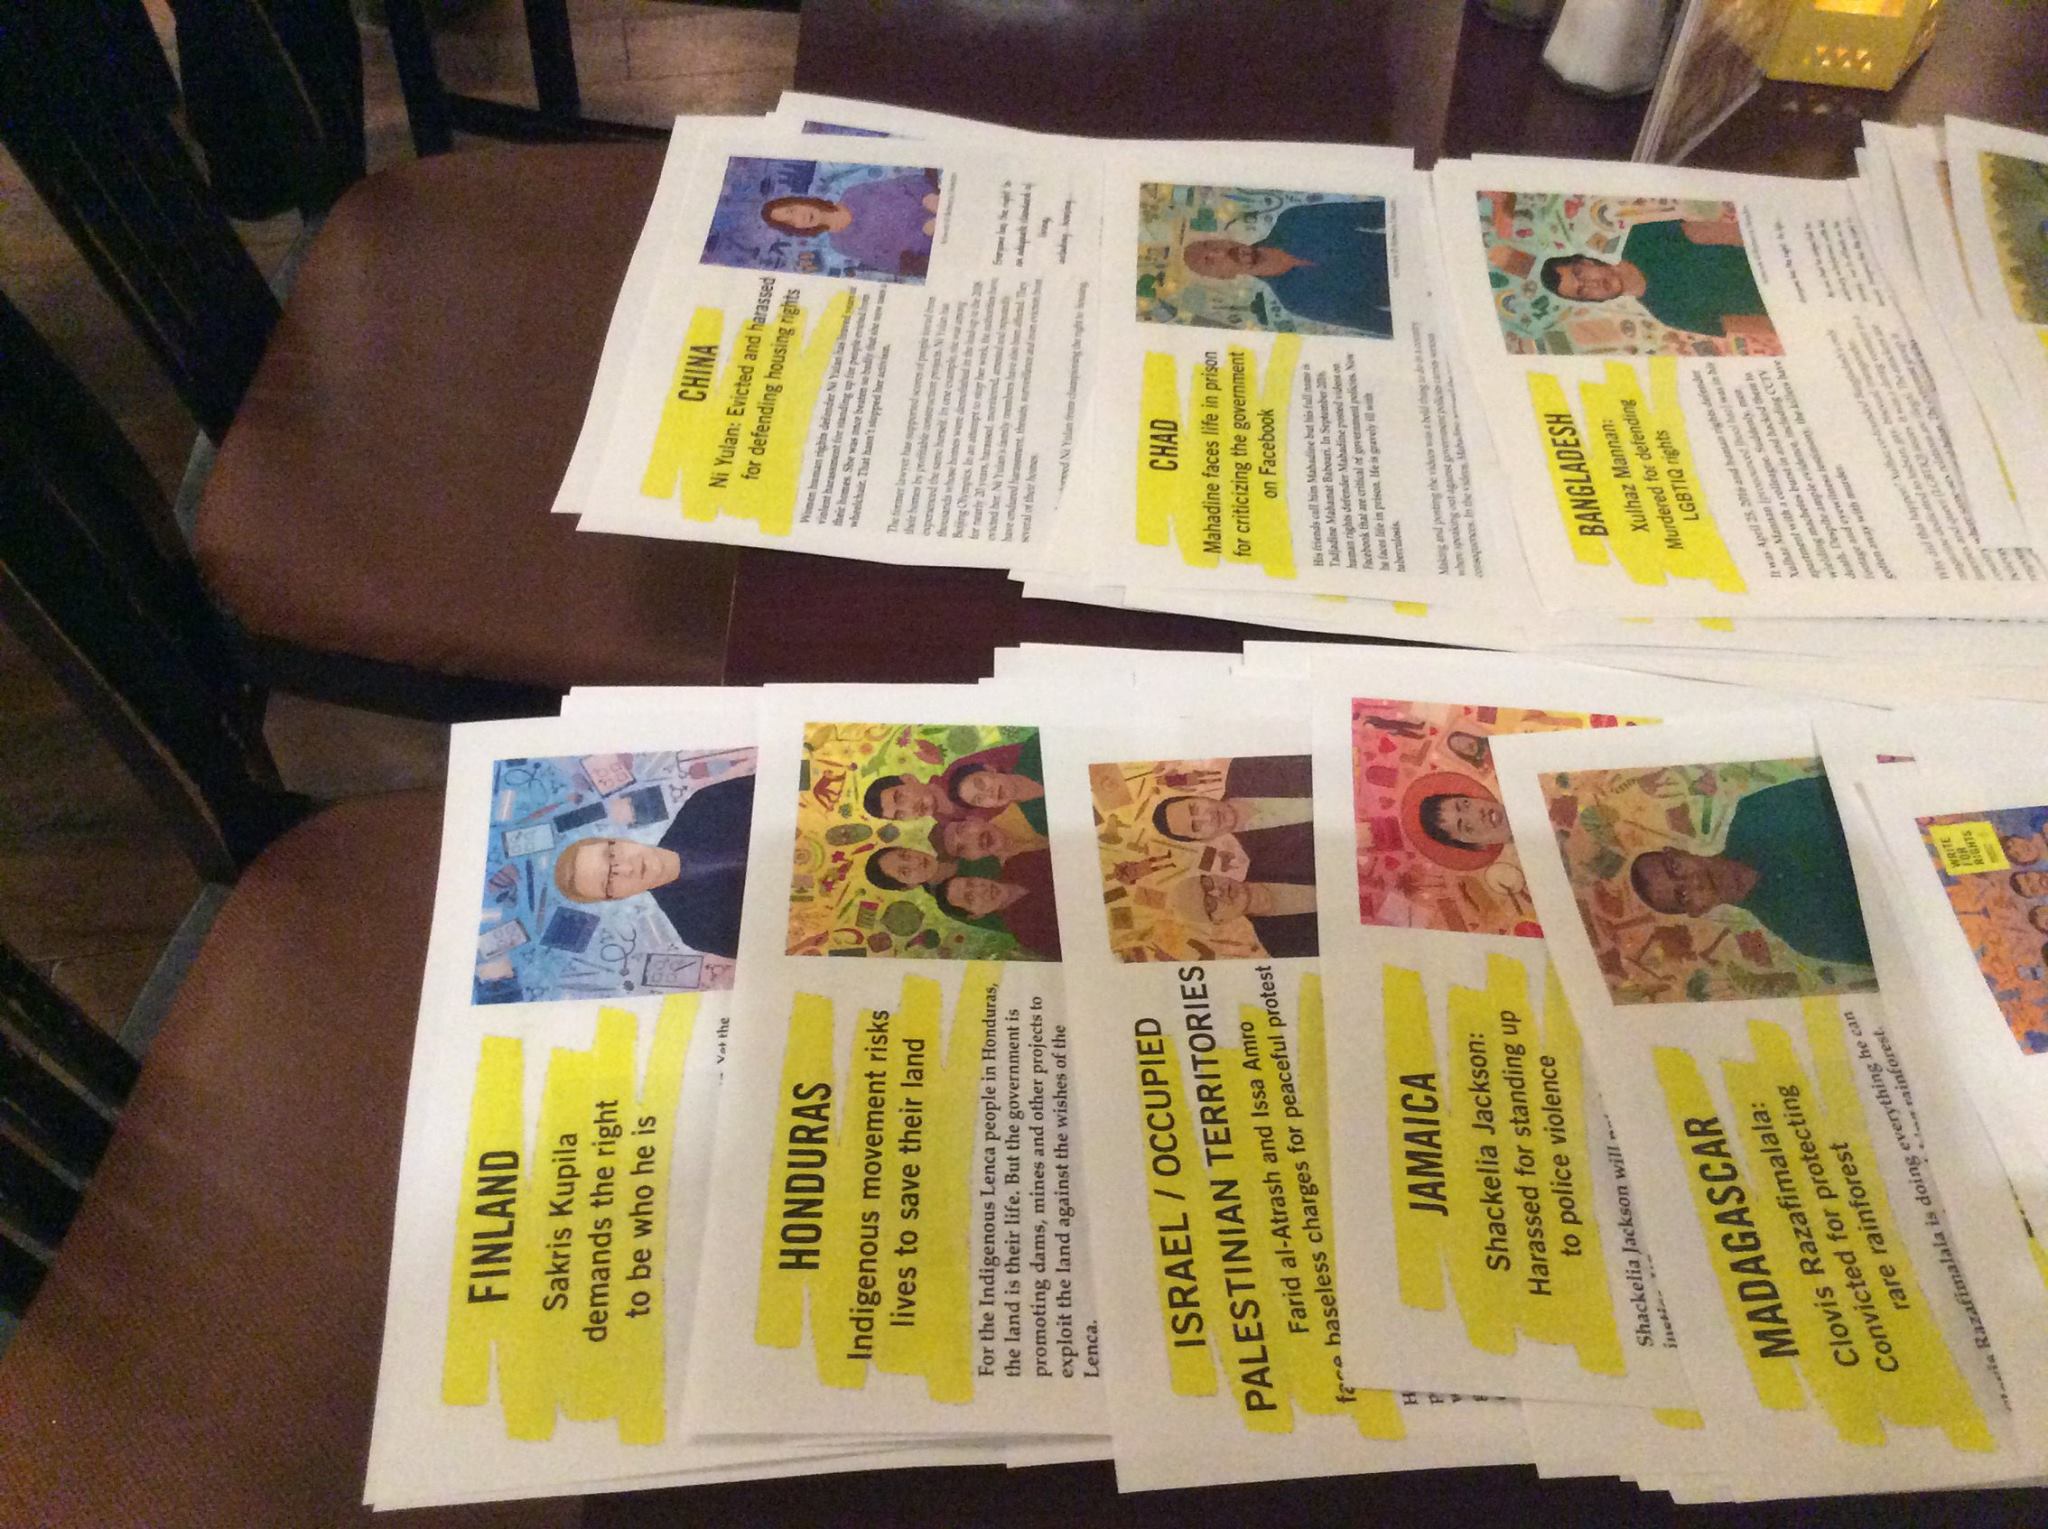 Human rights campaigns at monthly letter writing in Lethbridge, Alberta